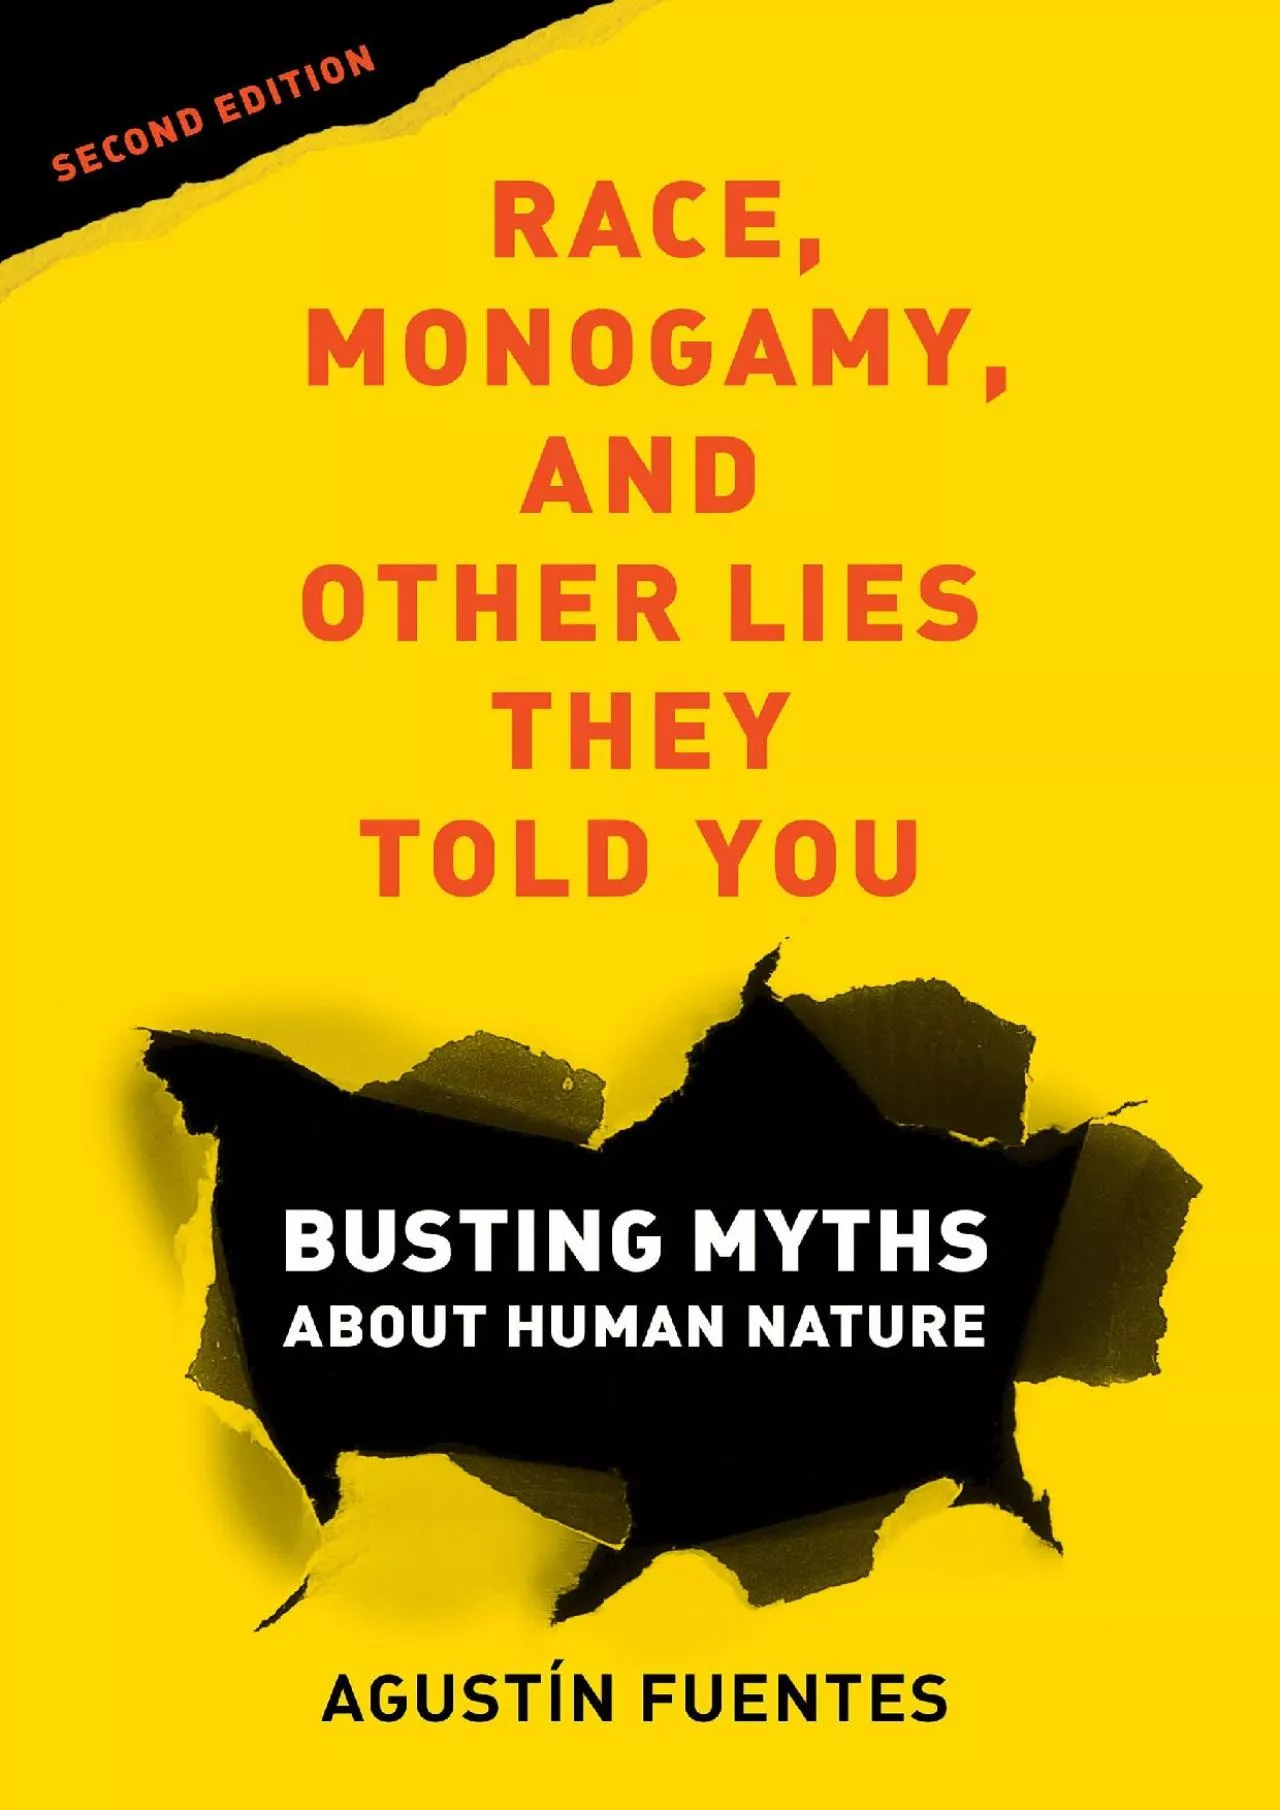 (EBOOK)-Race, Monogamy, and Other Lies They Told You, Second Edition: Busting Myths about